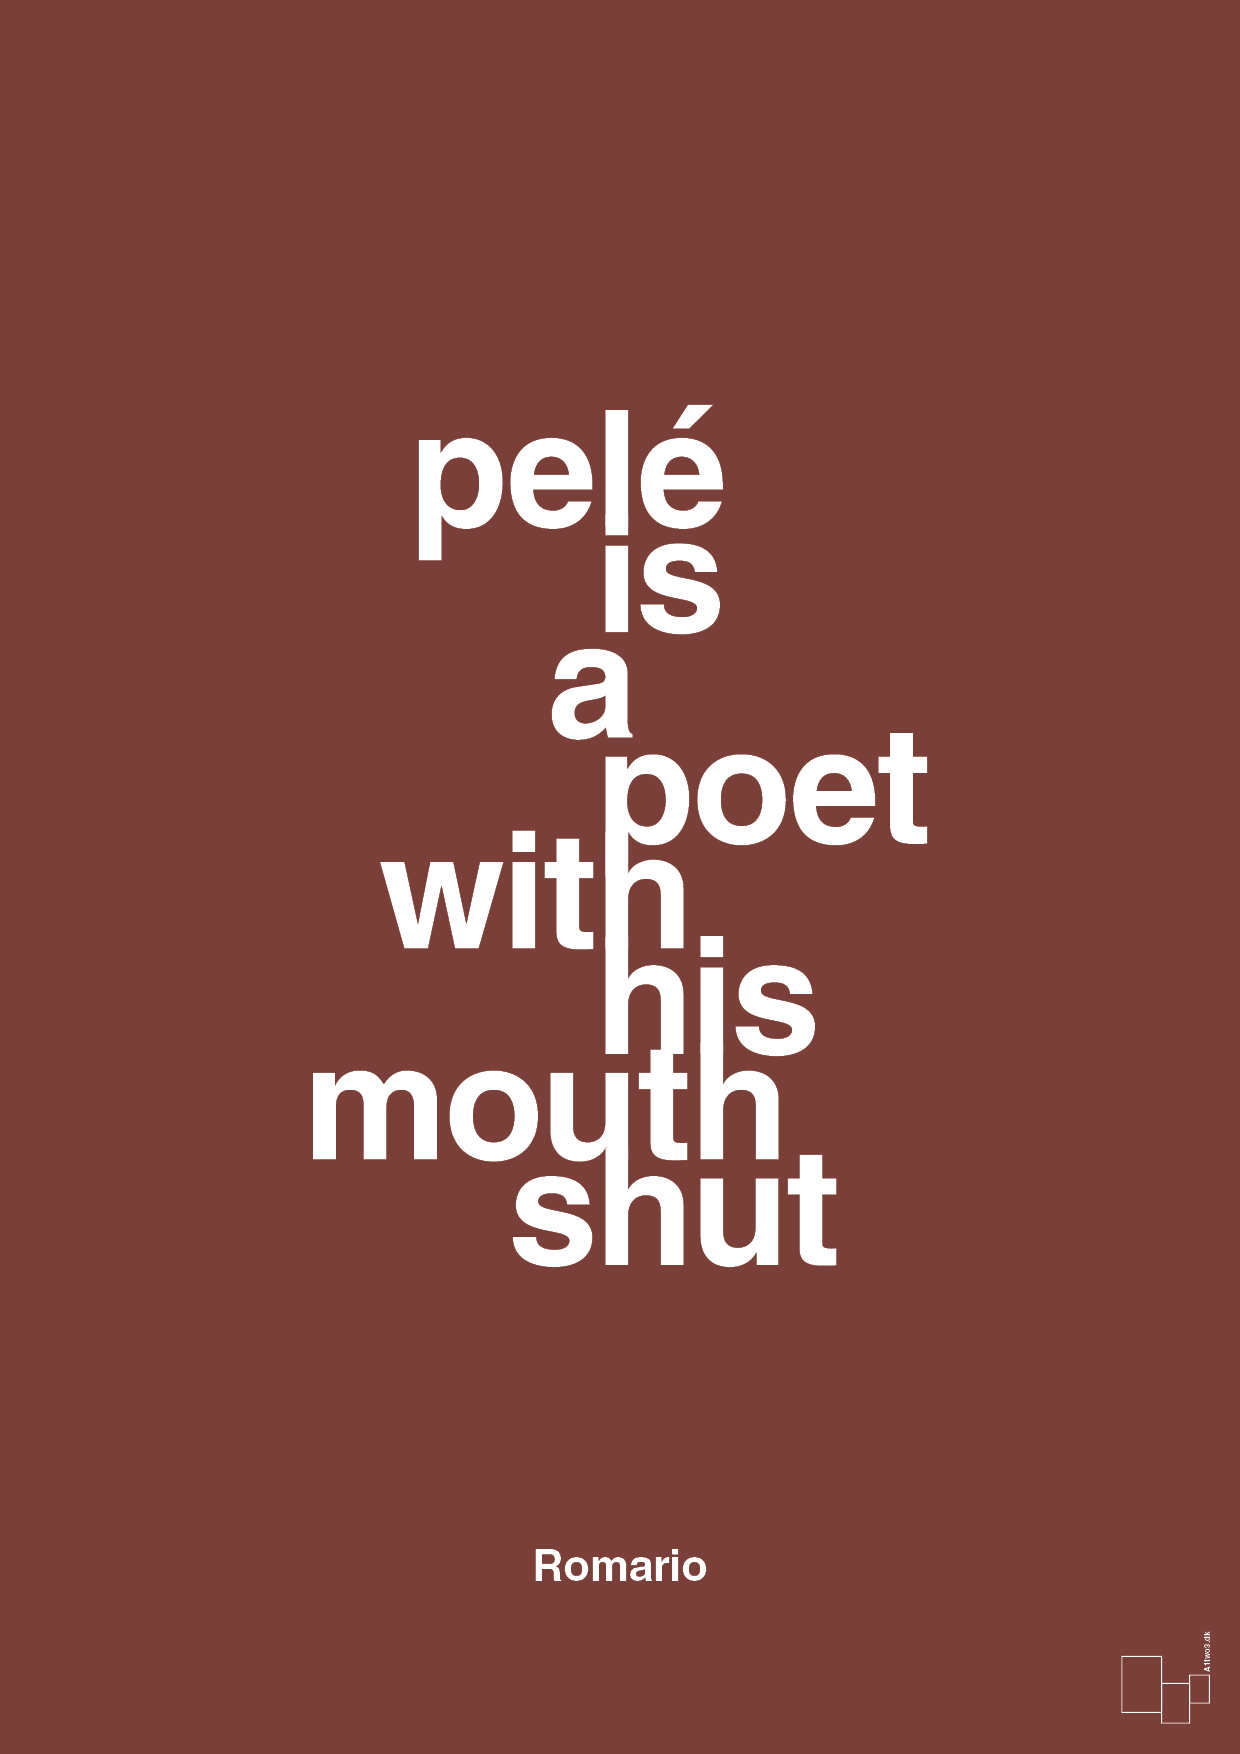 pelé is a poet with his mouth shut - Plakat med Citater i Red Pepper